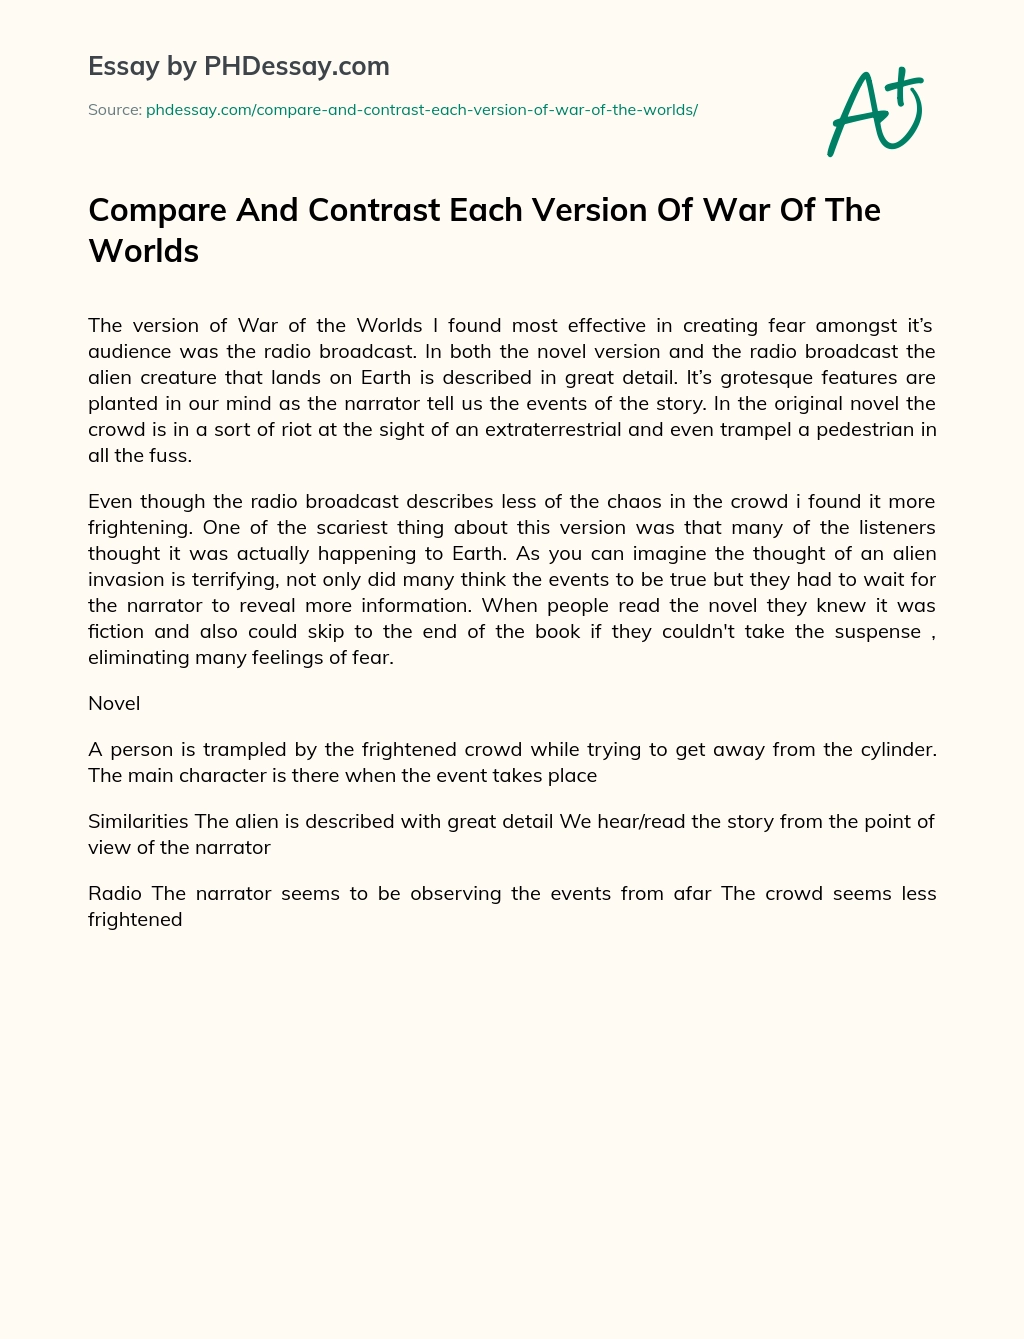 Compare And Contrast Each Version Of War Of The Worlds essay